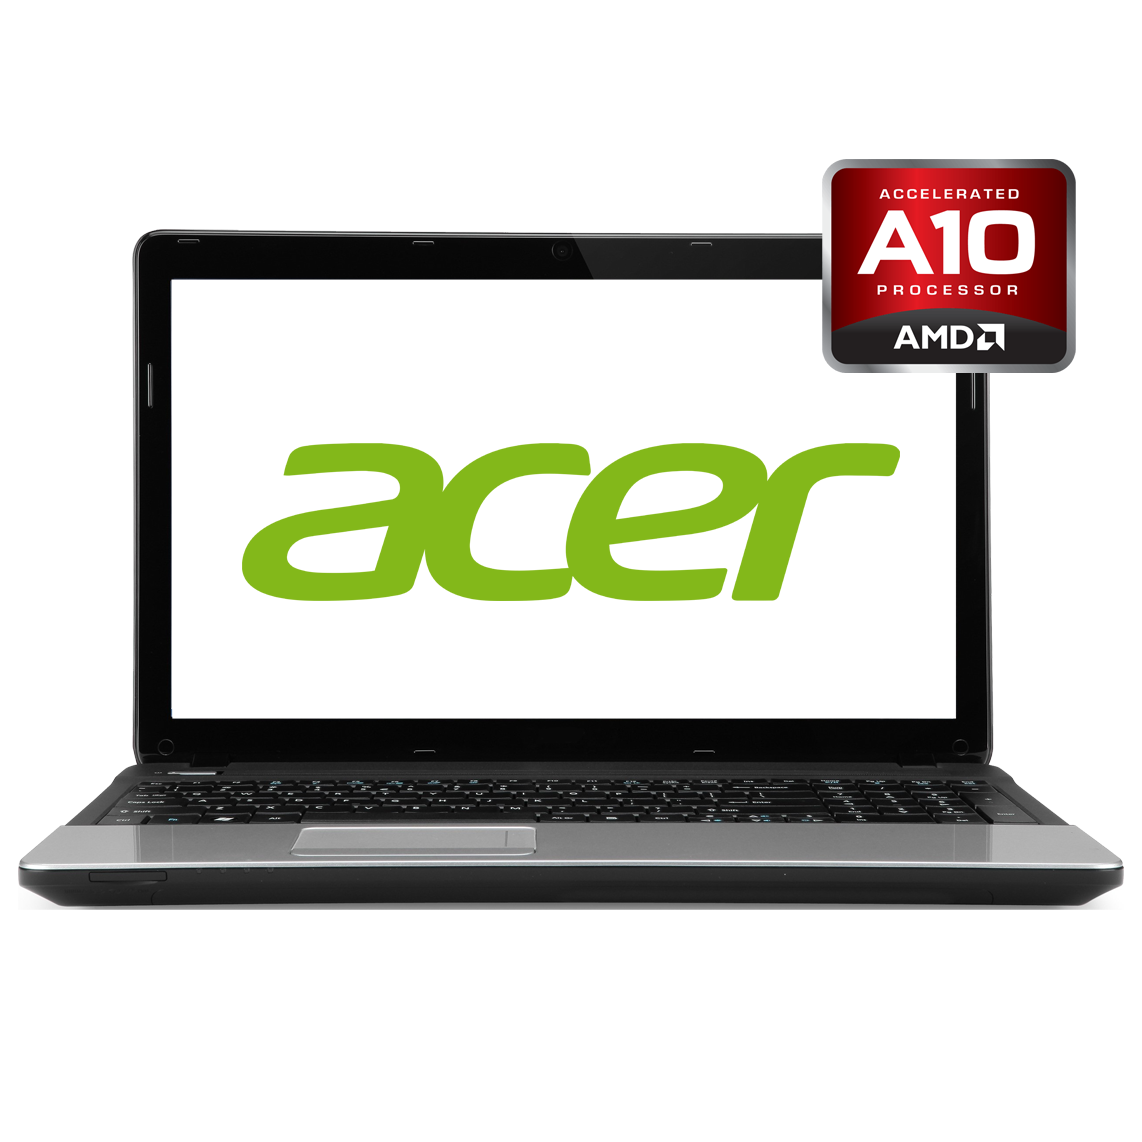 Acer - 15 inch AMD A10